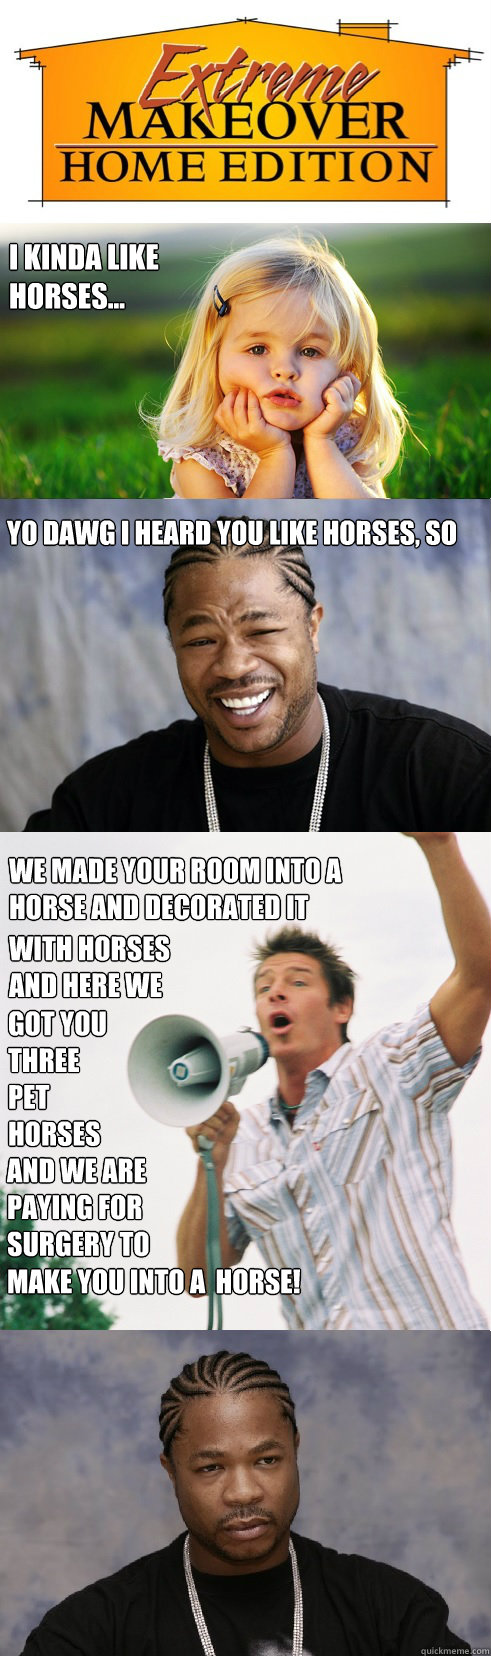 I kinda like horses... yo dawg i heard you like horses, so we made your room into a horse and decorated it with horses and here we got you three pet horses and we are paying for surgery to make you into a  horse! make you into a  horse! - I kinda like horses... yo dawg i heard you like horses, so we made your room into a horse and decorated it with horses and here we got you three pet horses and we are paying for surgery to make you into a  horse! make you into a  horse!  Extreme Takeover